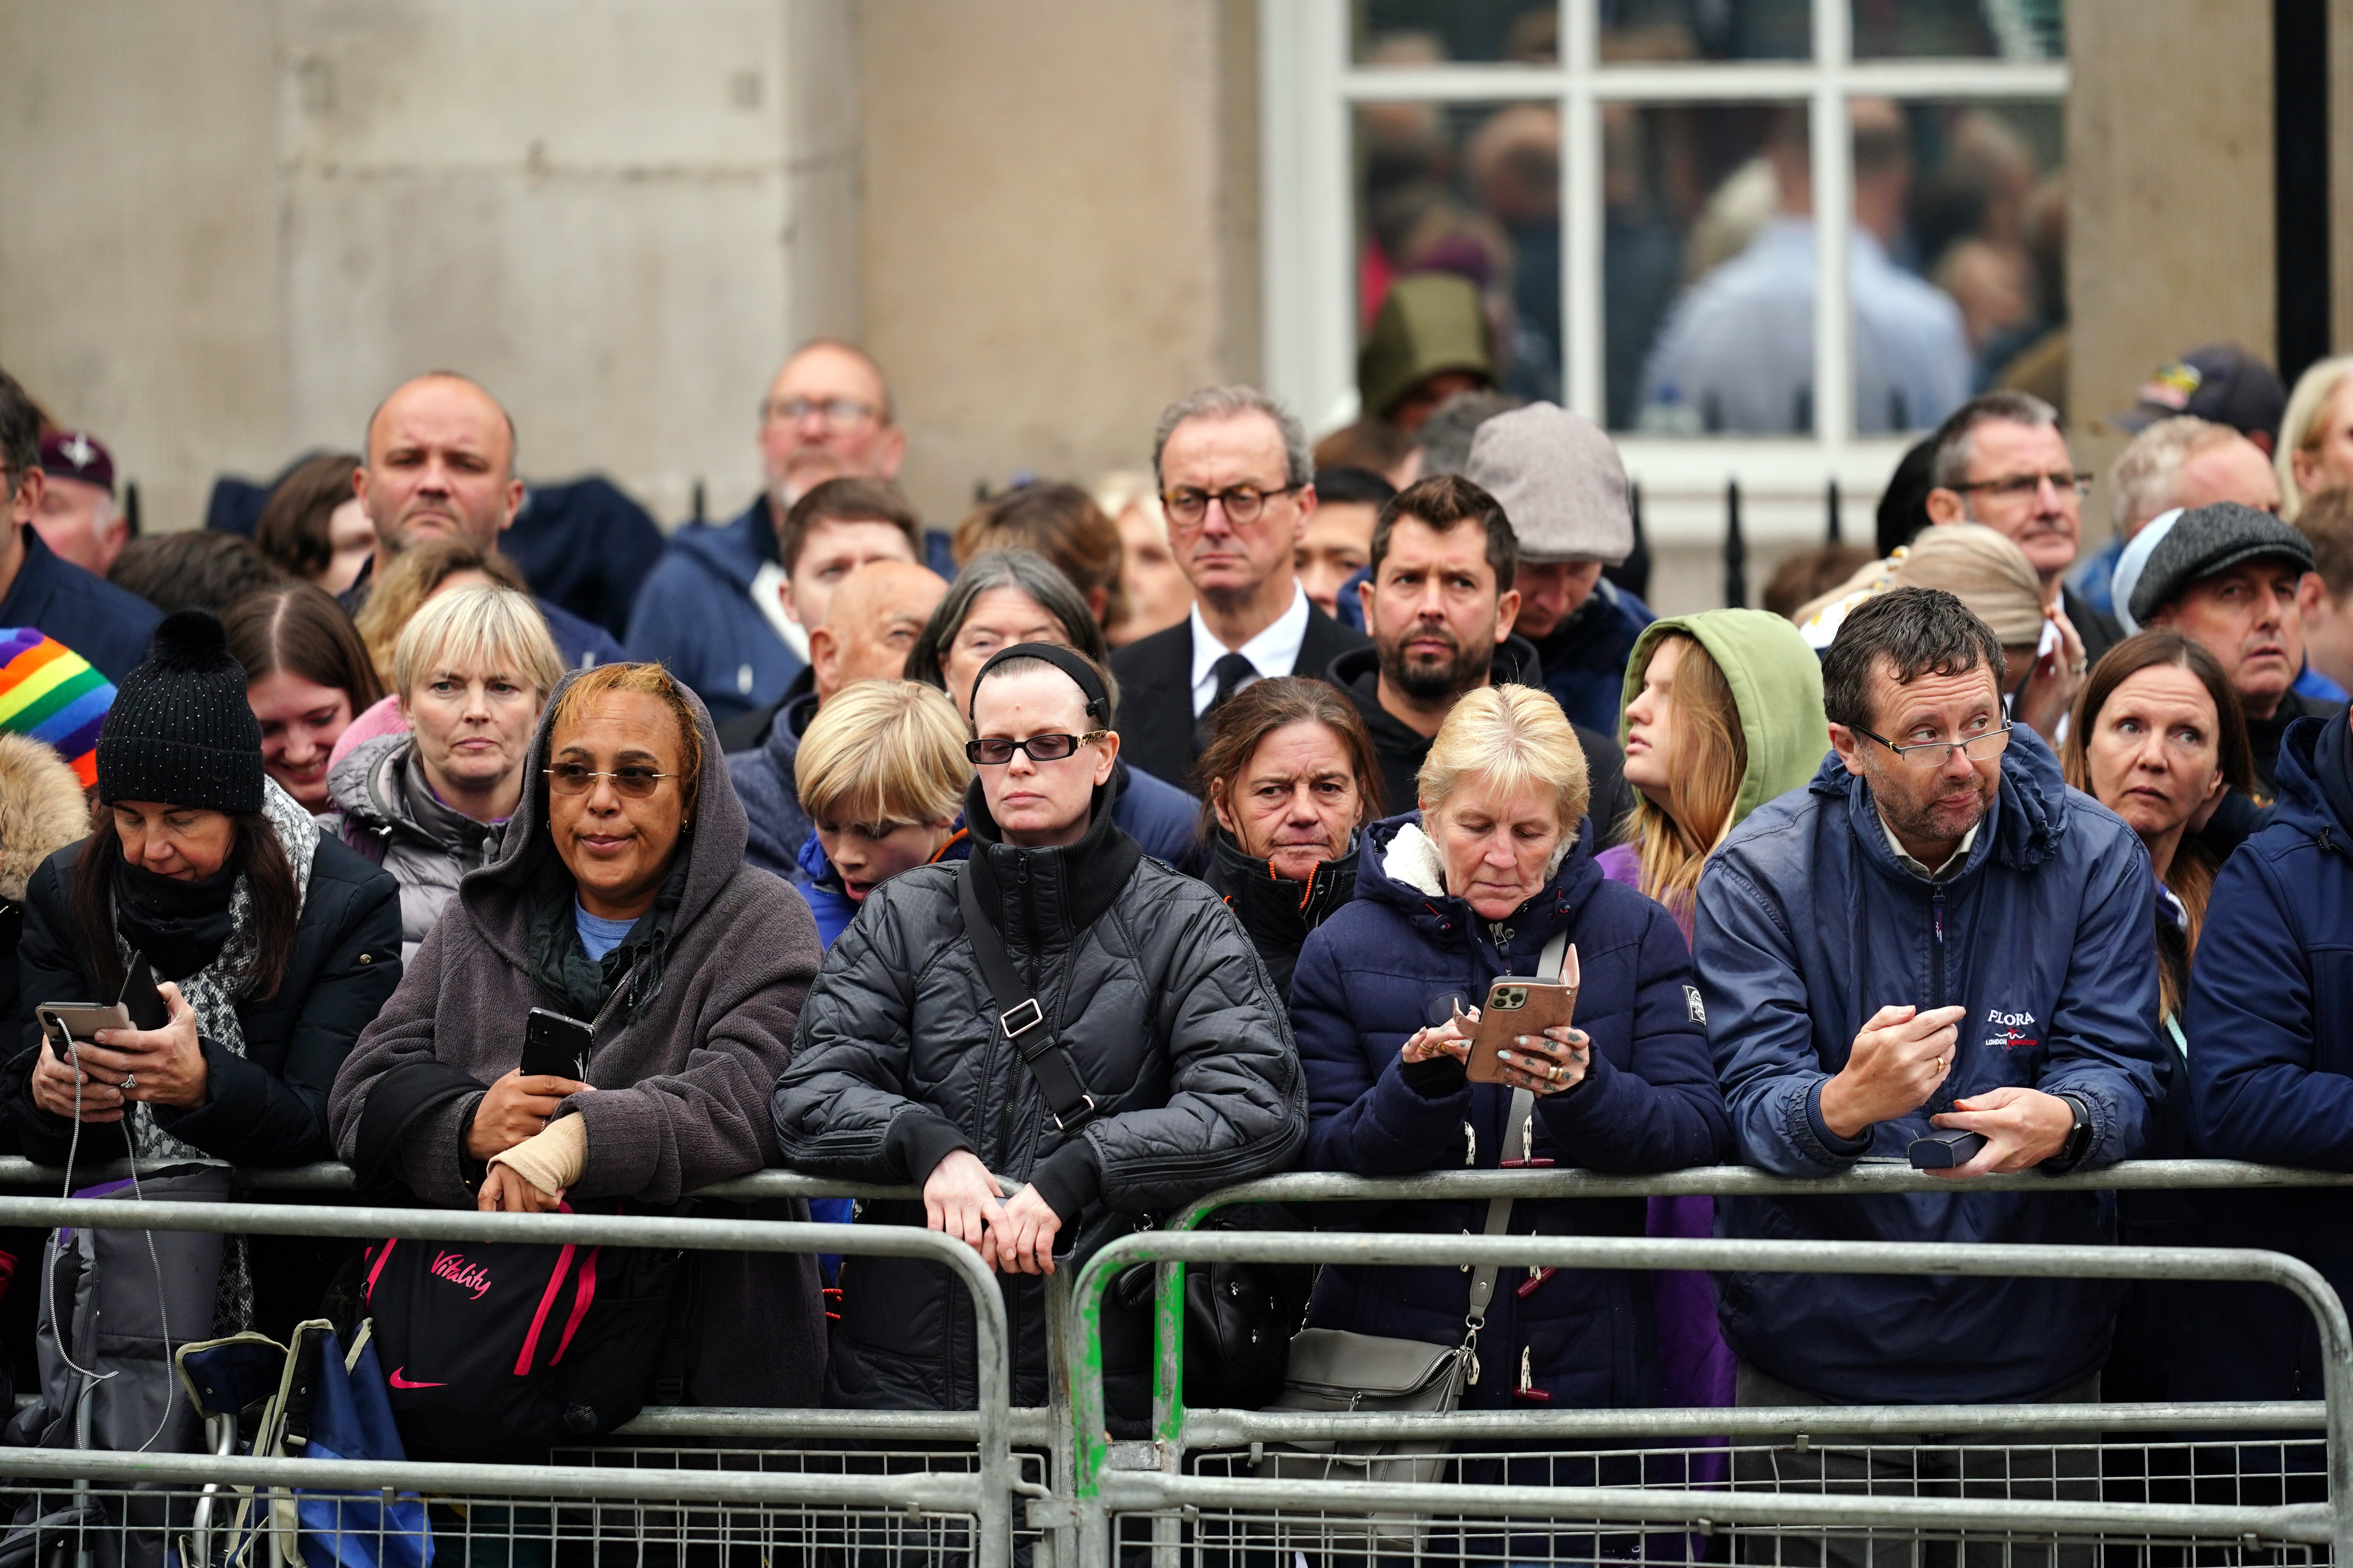 The crowd in Whitehall ahead of the state funeral of the Queen (David Davies/PA)